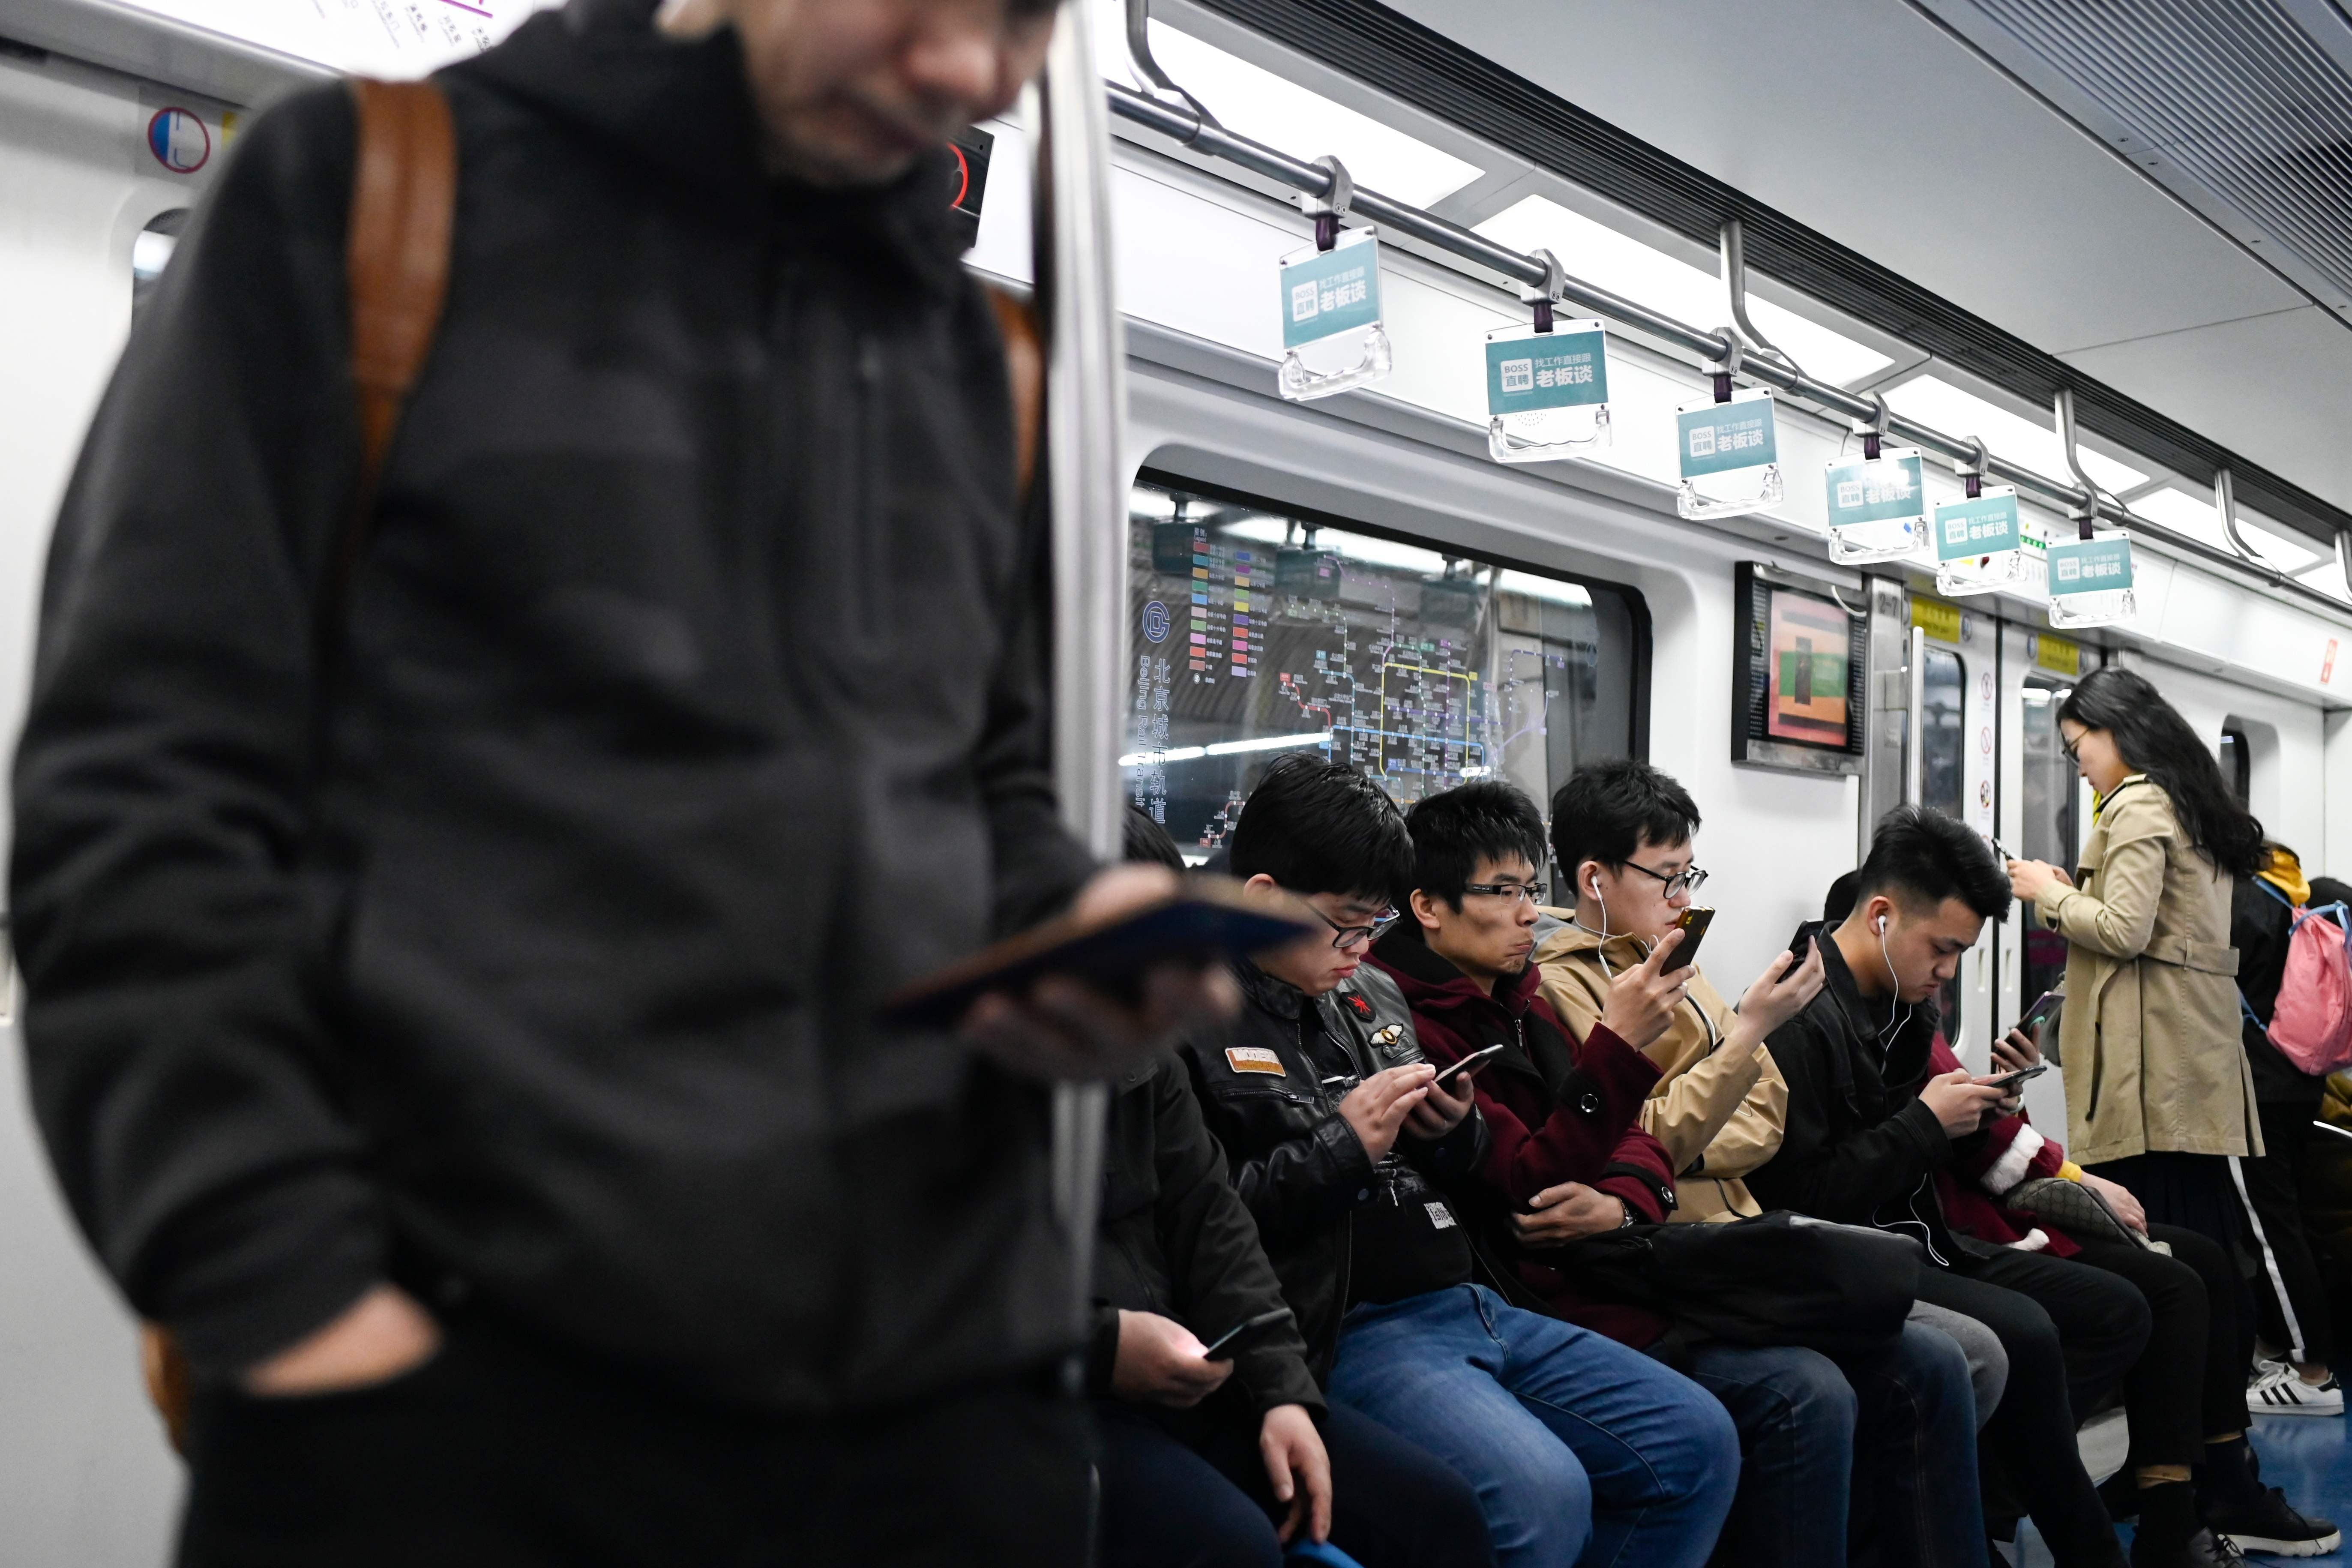 Commuters use their mobile phone as they ride on a subway in Beijing on April 8. While the mainland lags behind Hong Kong when it comes to smartphone penetration, it is far ahead in mobile payments. Photo: AFP